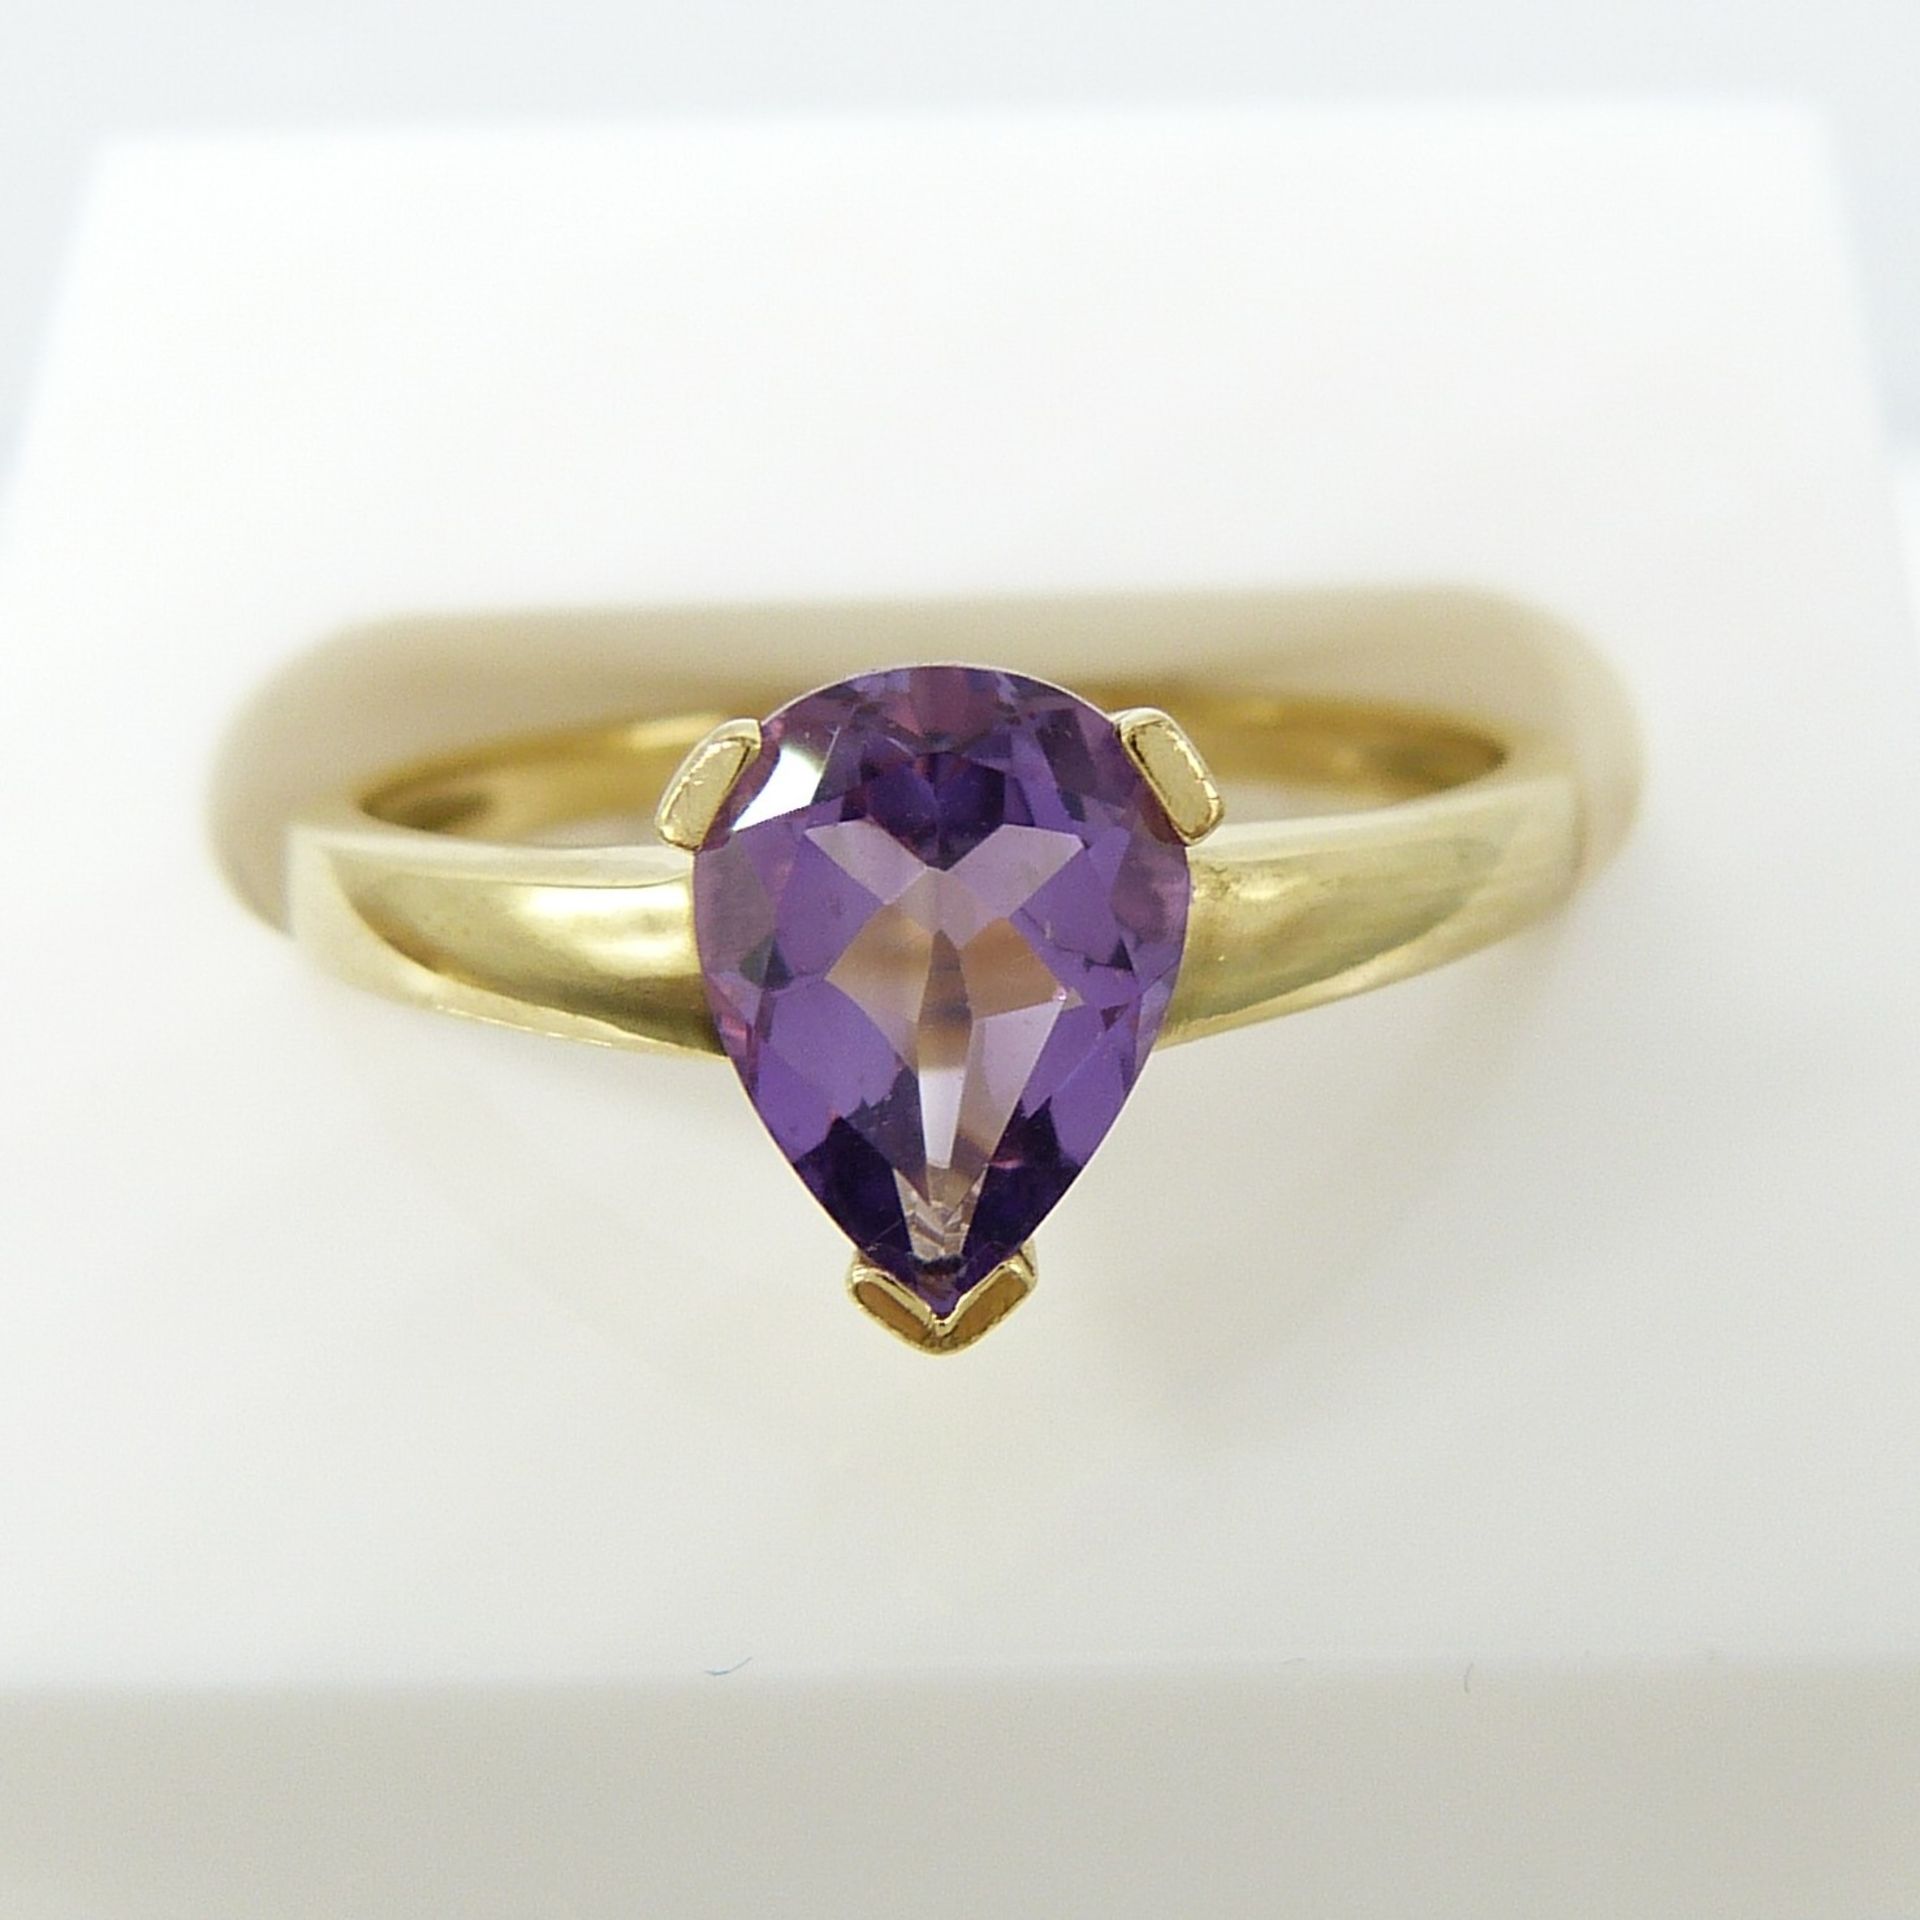 Pear-Cut Amethyst Dress Ring In 9K Yellow Gold - Image 6 of 6